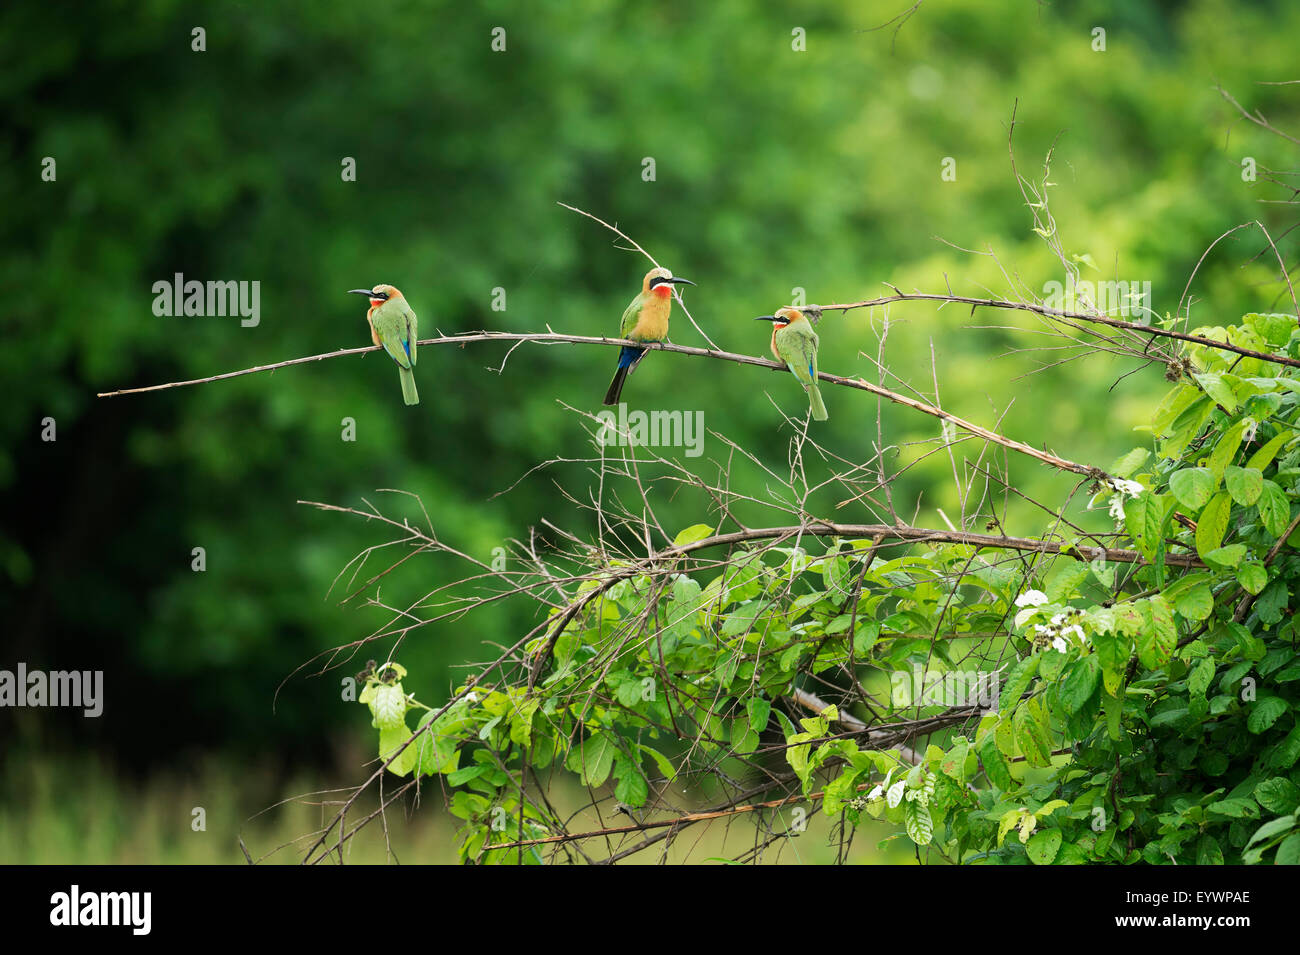 White-fronted bee-eater (Merops bullockoides), South Luangwa National Park, Zambia, Africa Stock Photo